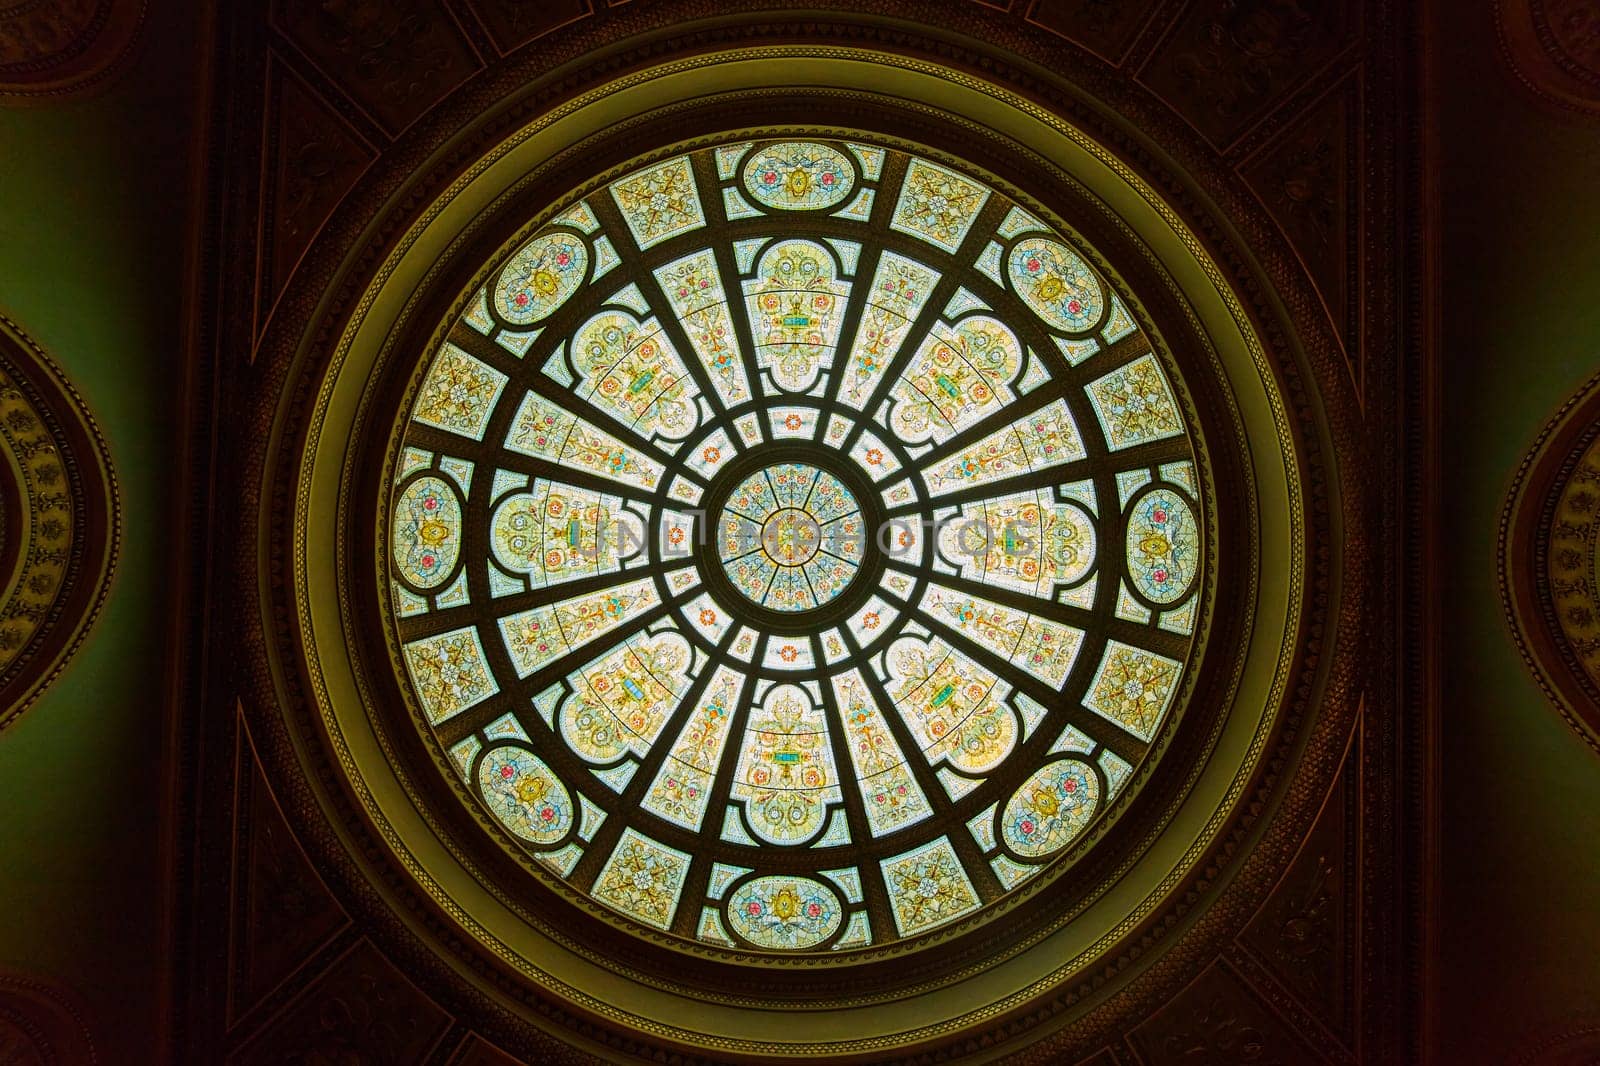 Image of Ornate dome ceiling with Celtic stained glass décor design, green and gold, colorful, Tiffany Dome